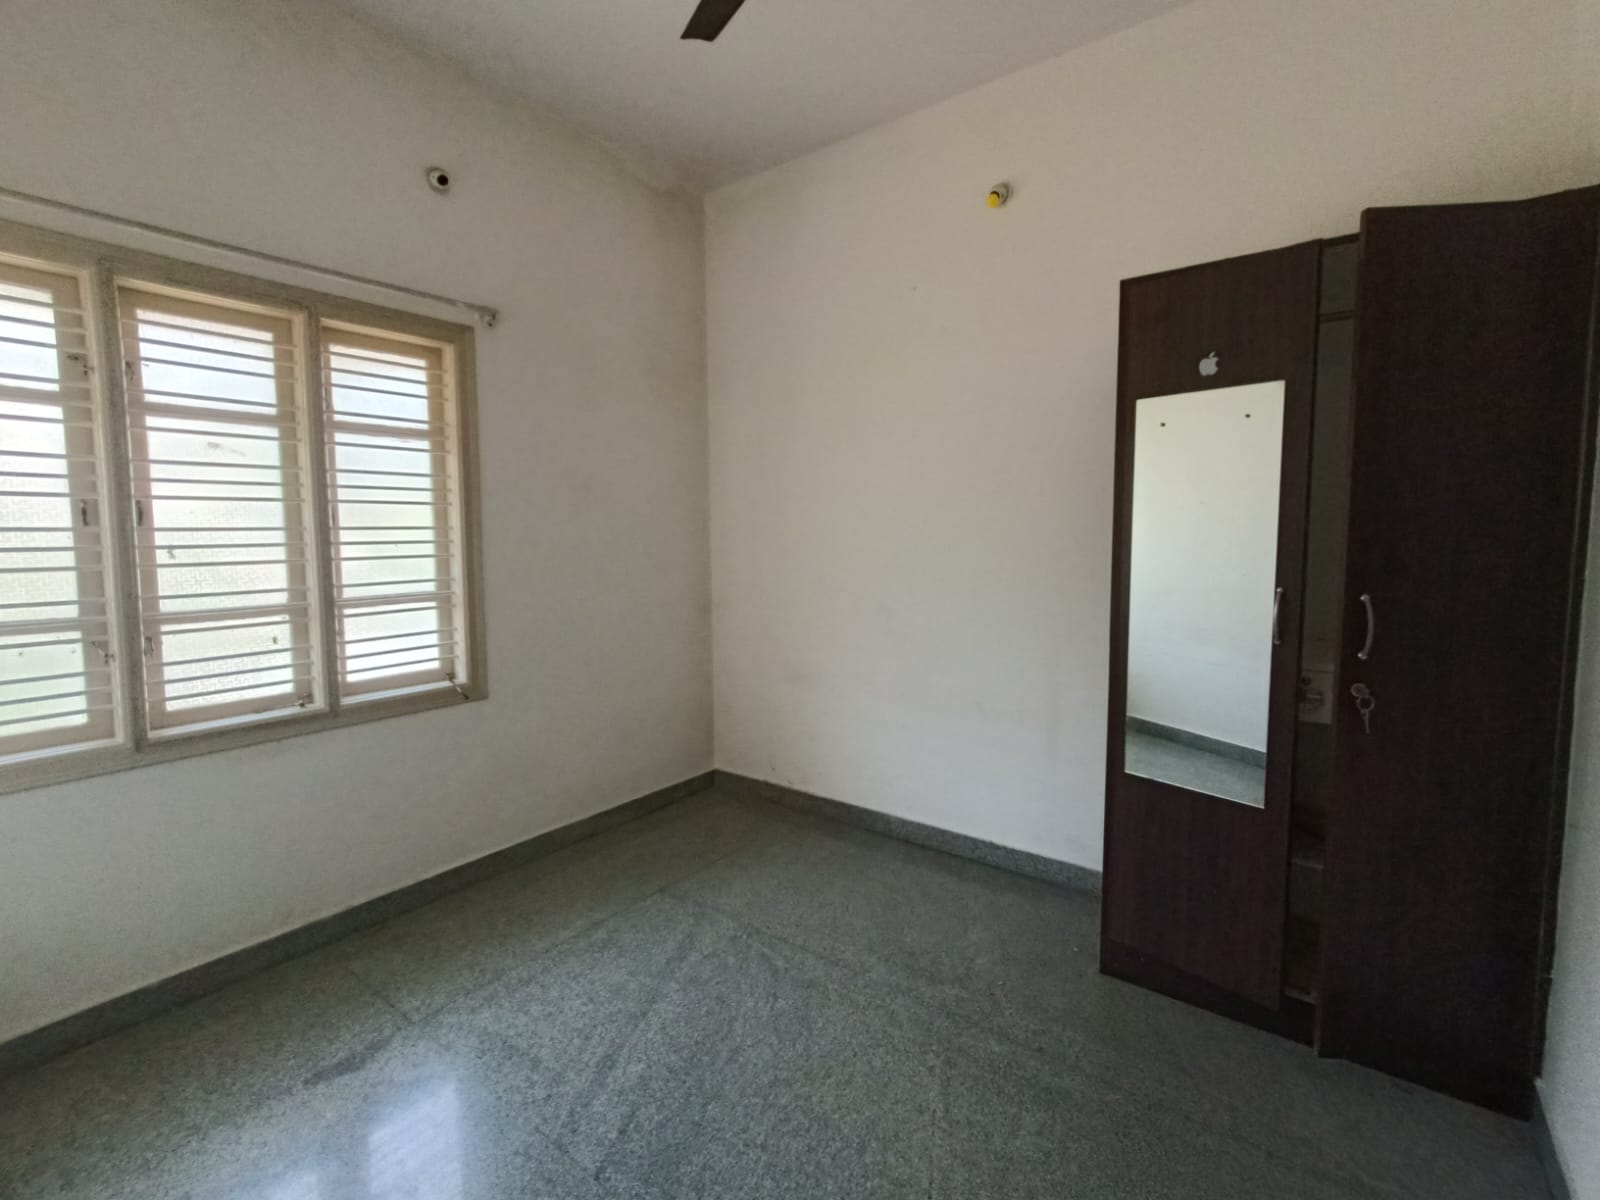 2 BHK Residential Apartment for Lease Only at JAM-6434 in JaiBharath Nagar